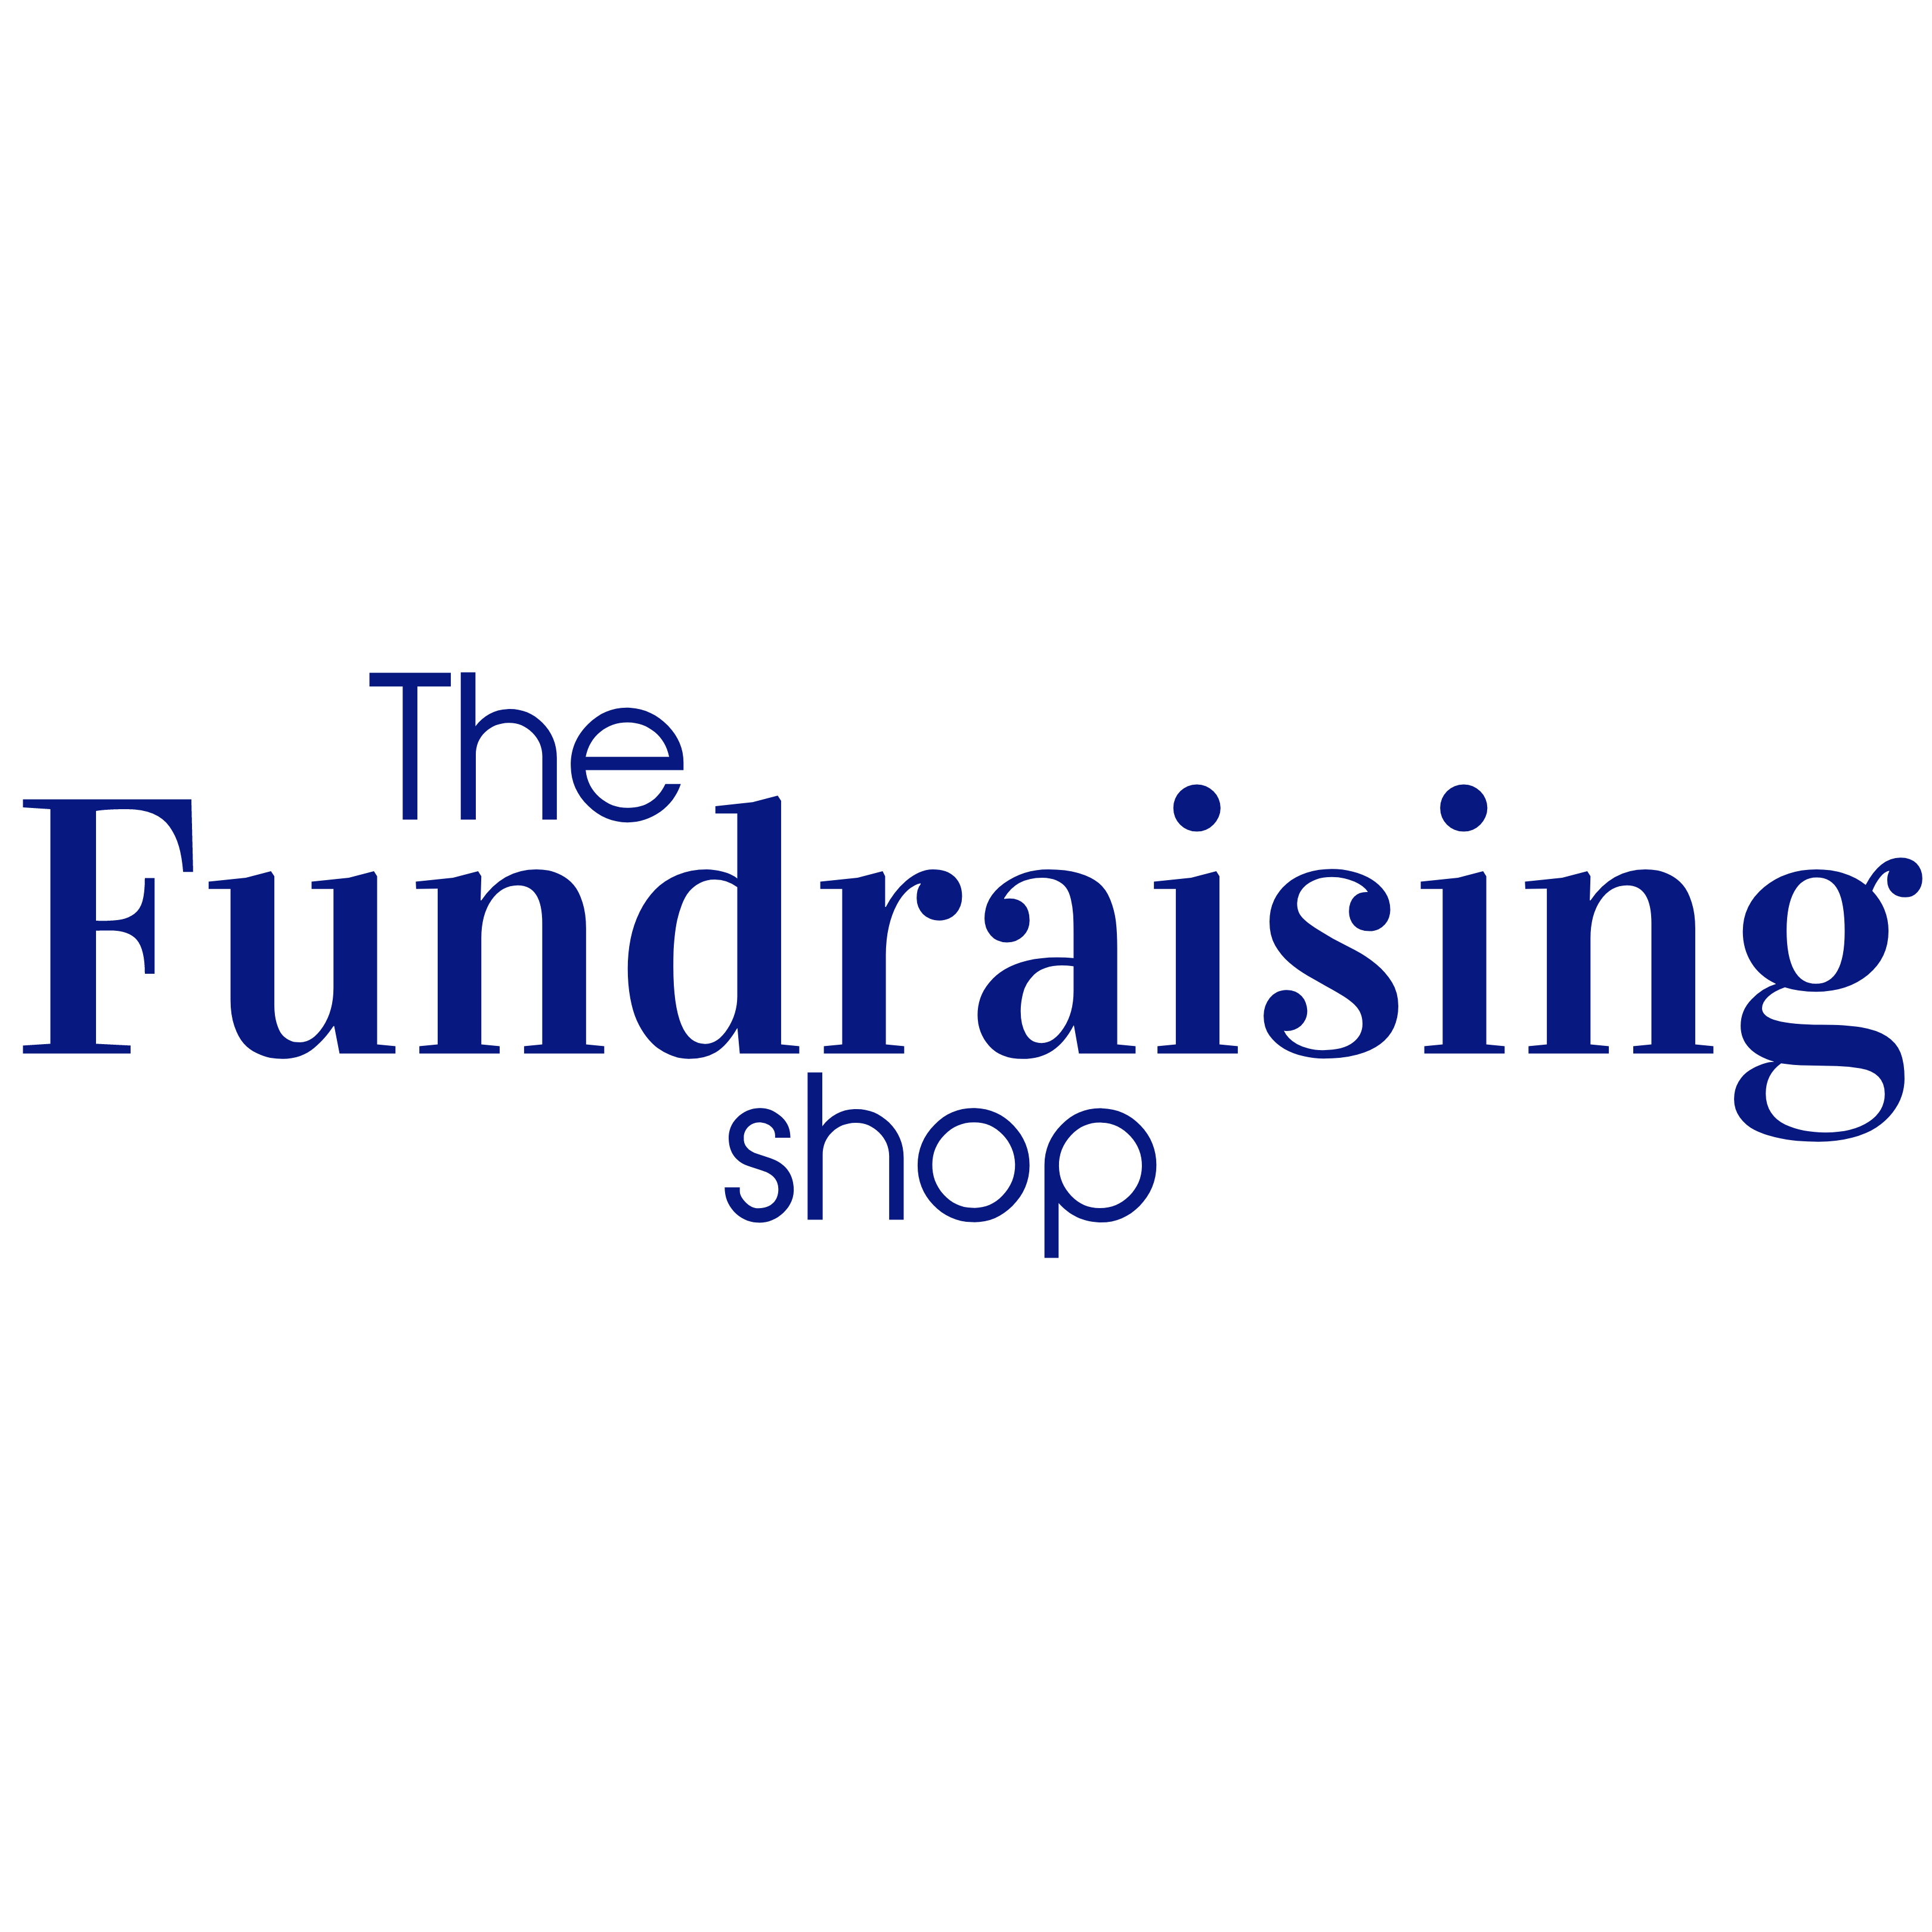 The Fundraising Shop